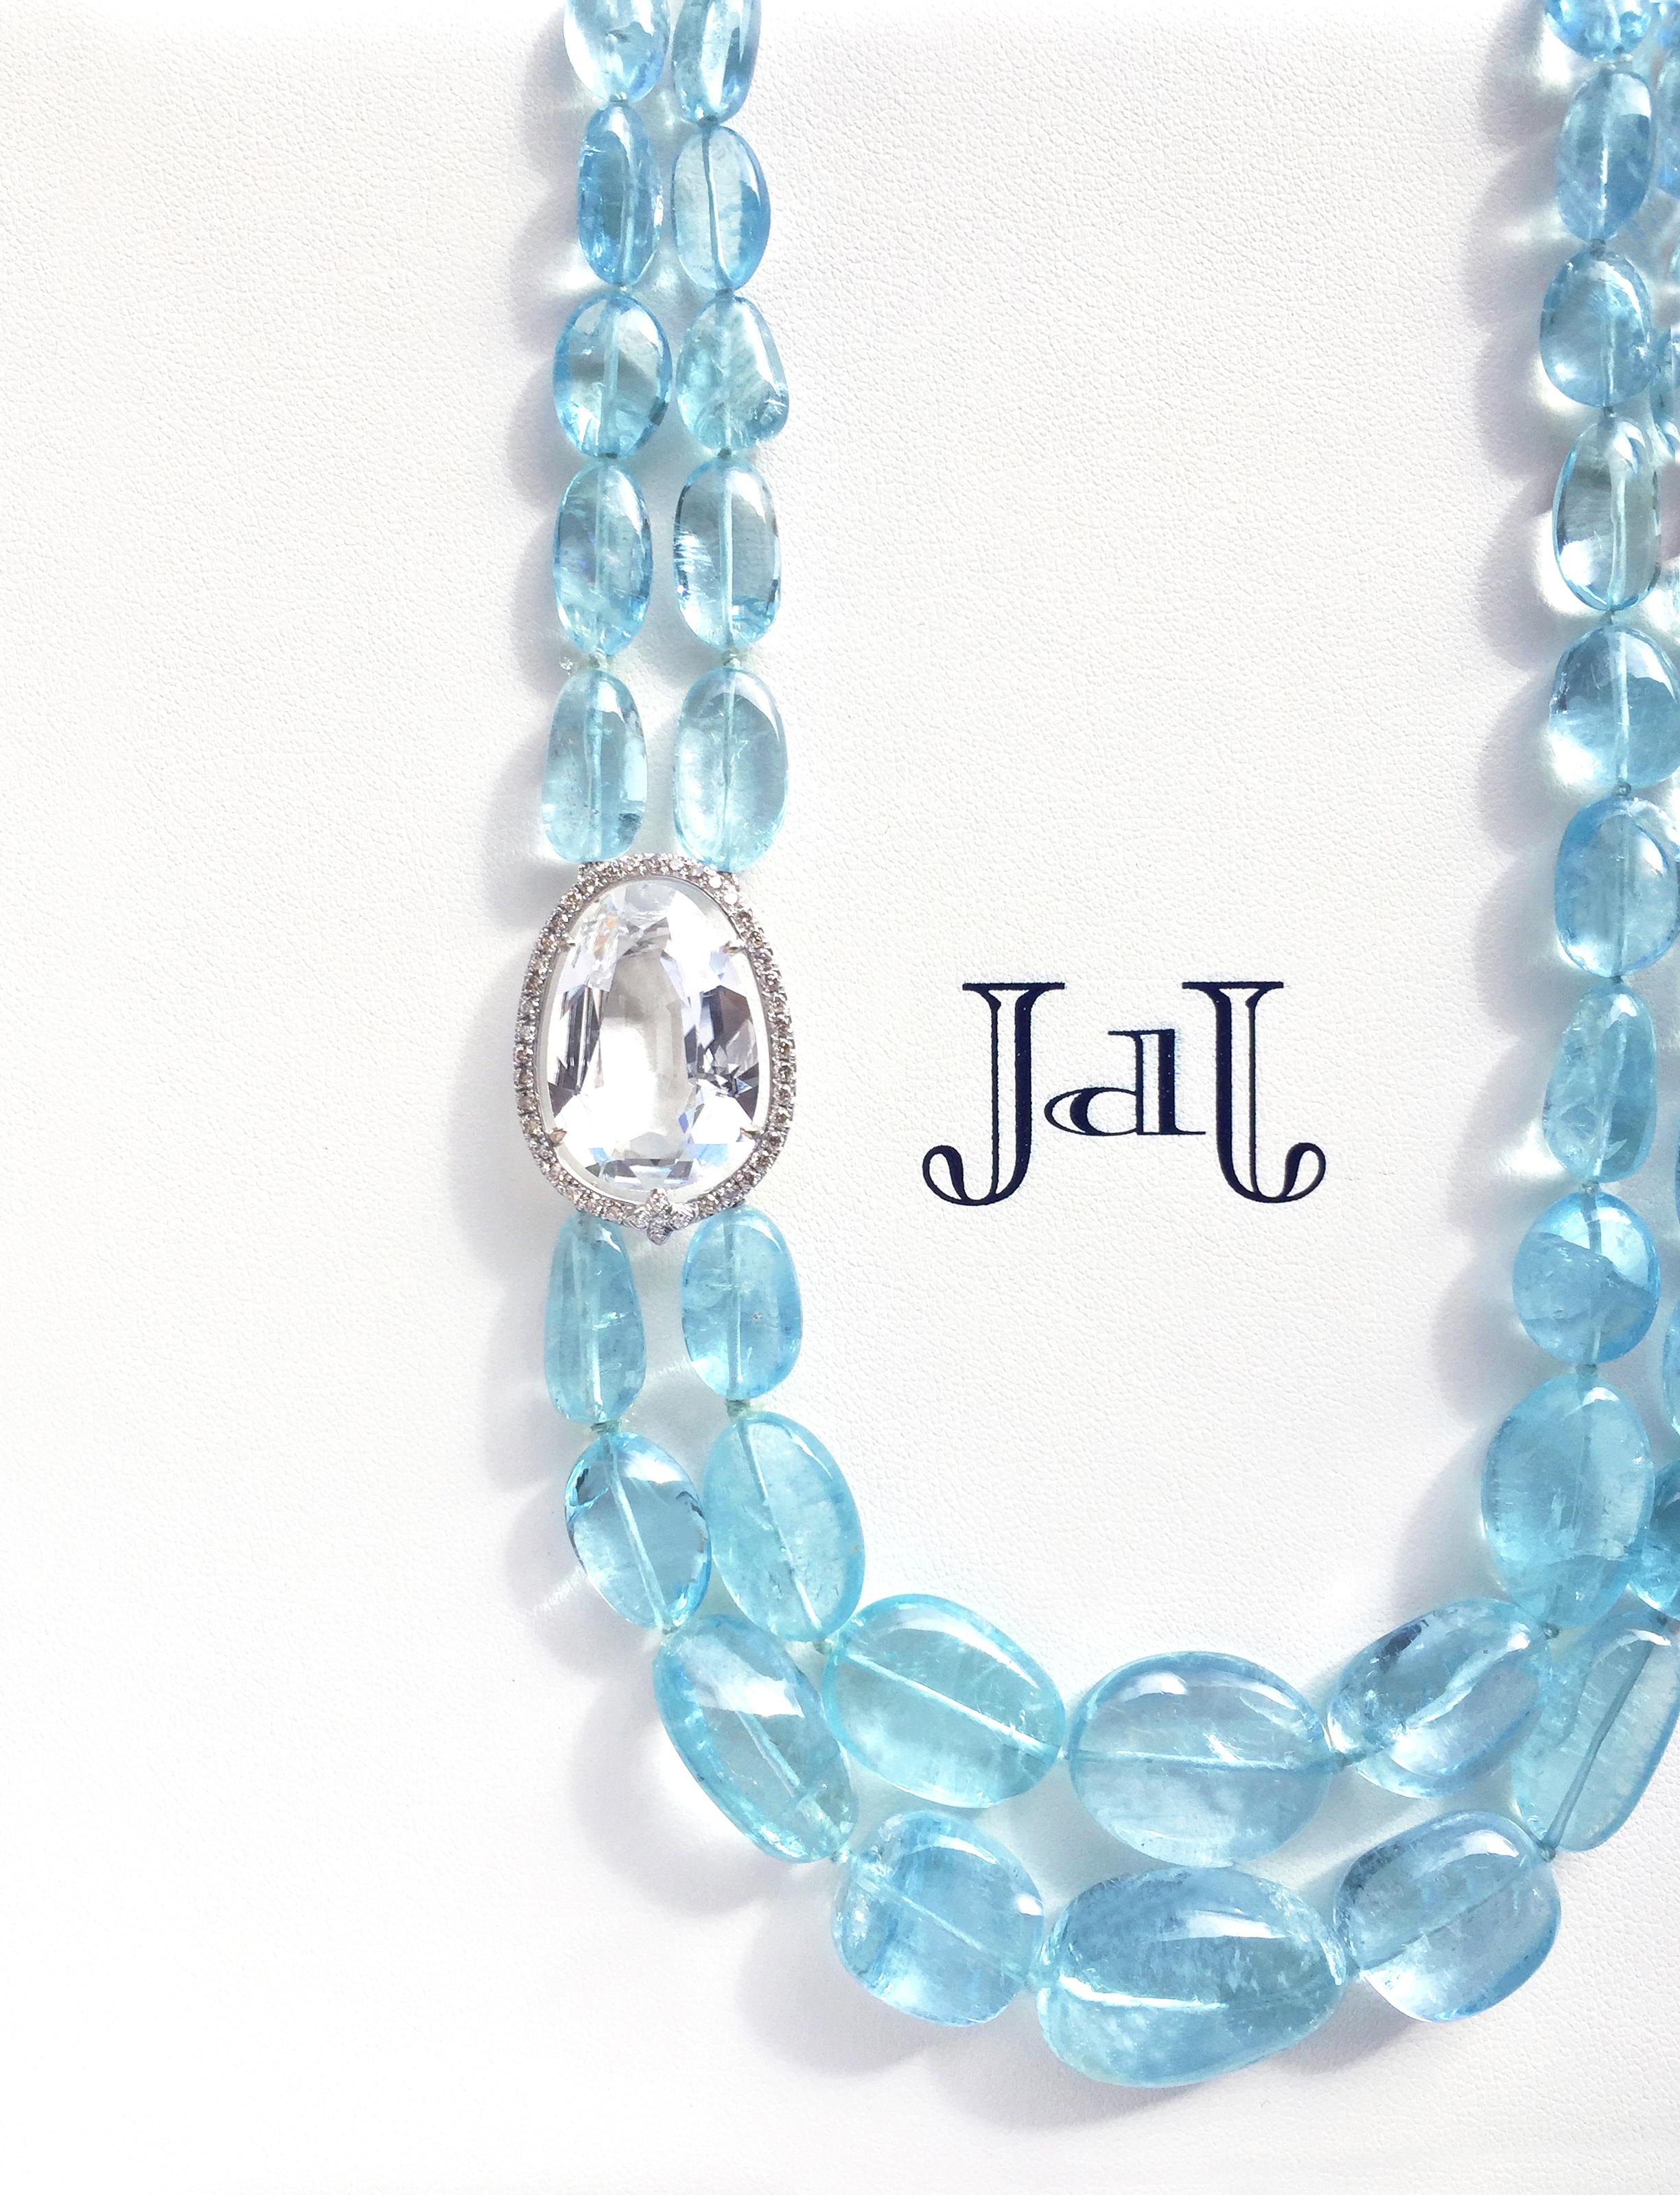 JdJ Couture - One of a kind  ( editorial caption for style ) Carved graduated Aquamarine Beads weighing approximately 400ctw double strand necklace with spectacular antique mixed cut cushion /pear shaped White Tourmaline weighing 17.13ct and faceted